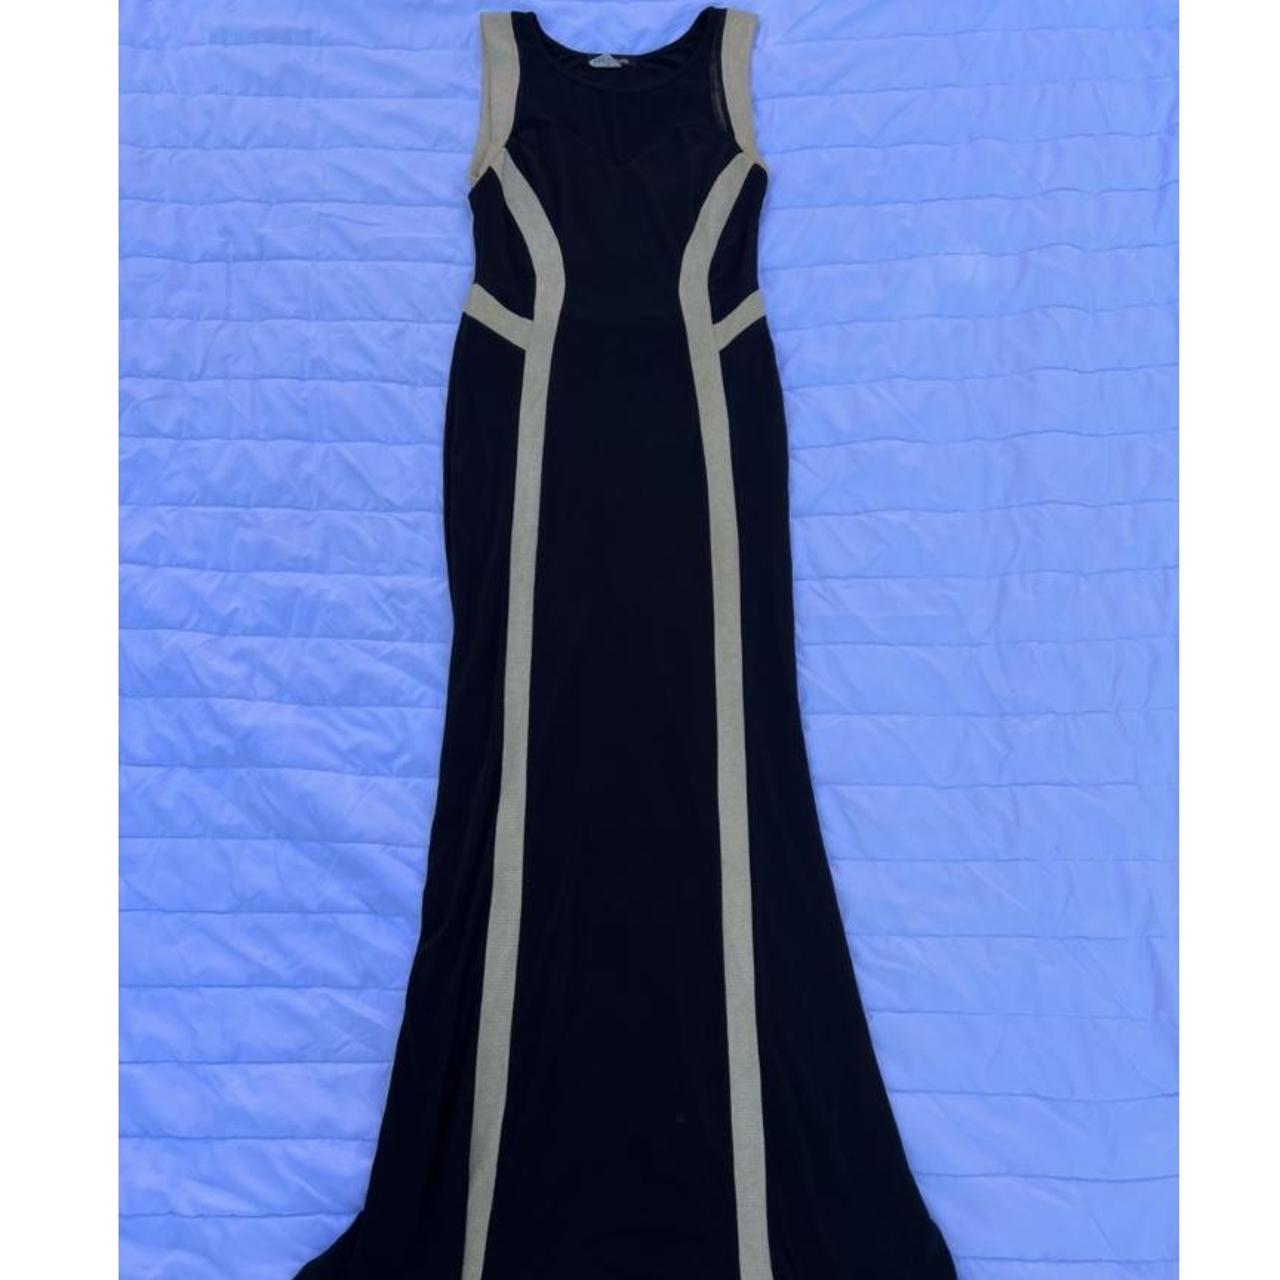 Product Image 1 - Really pretty long dress for